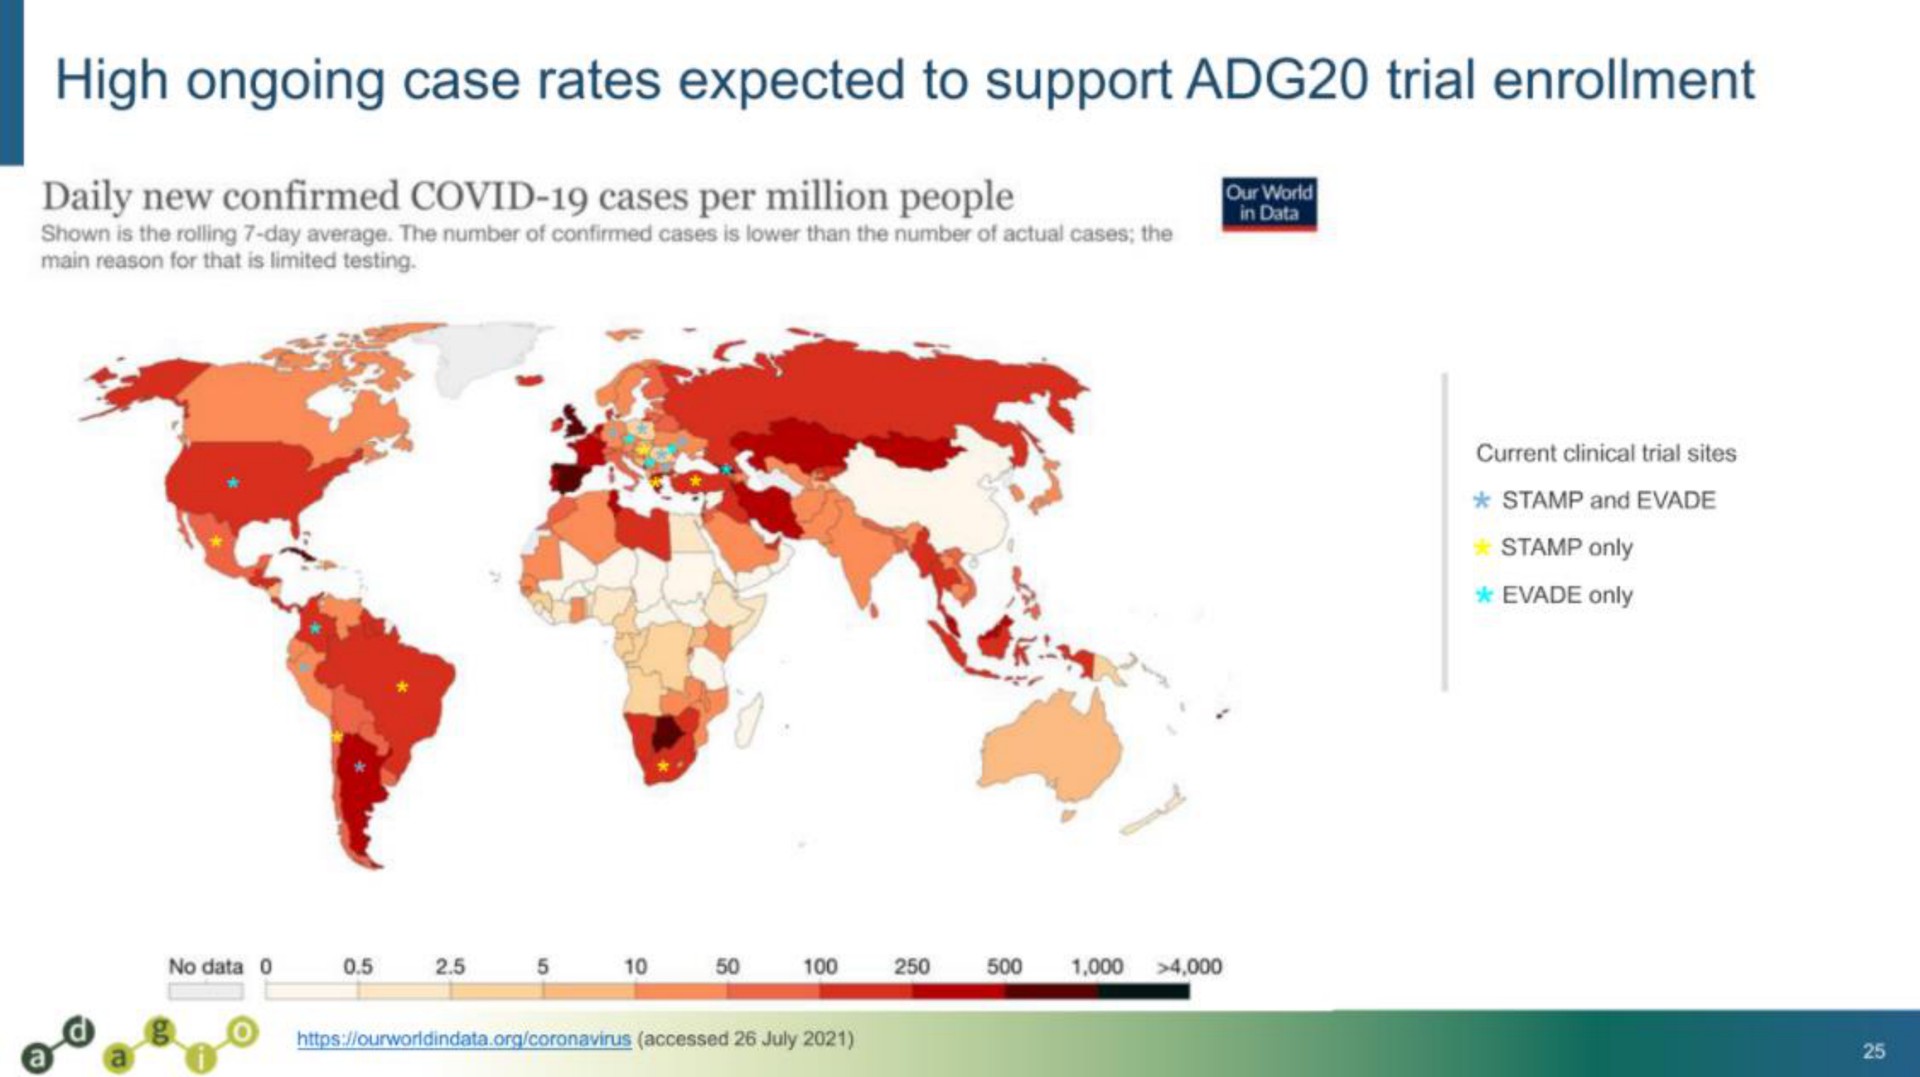 high ongoing case rates expected to support trial enrollment | Adagio Therapeutics